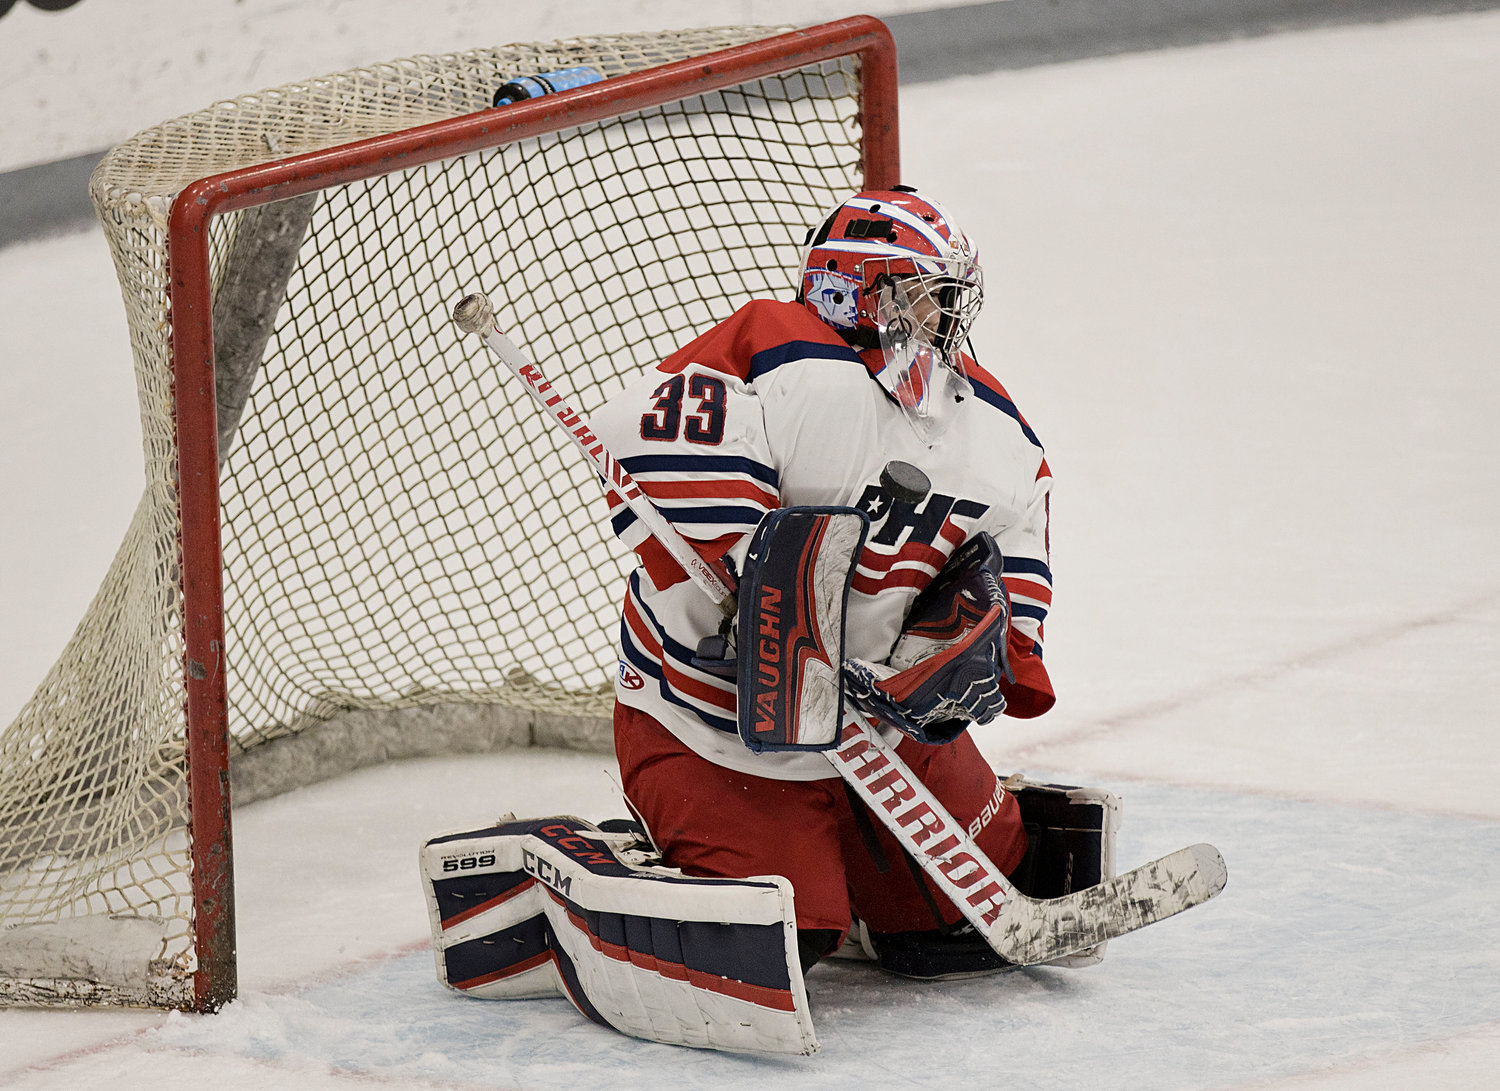 Goalie Stephen Dutra uses his chest to stop a shot during the second period.